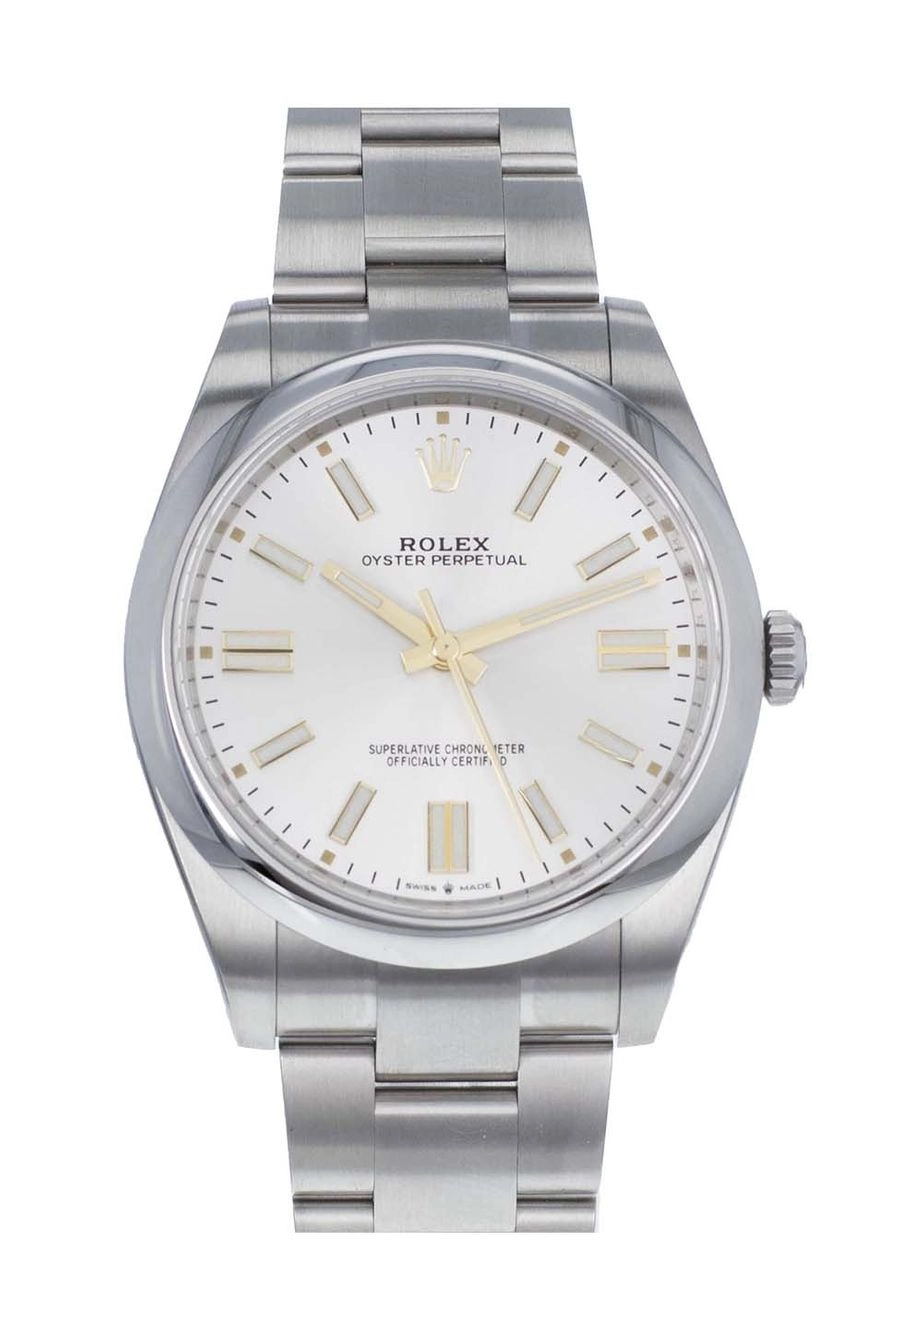 ROLEX Oyster Perpetual